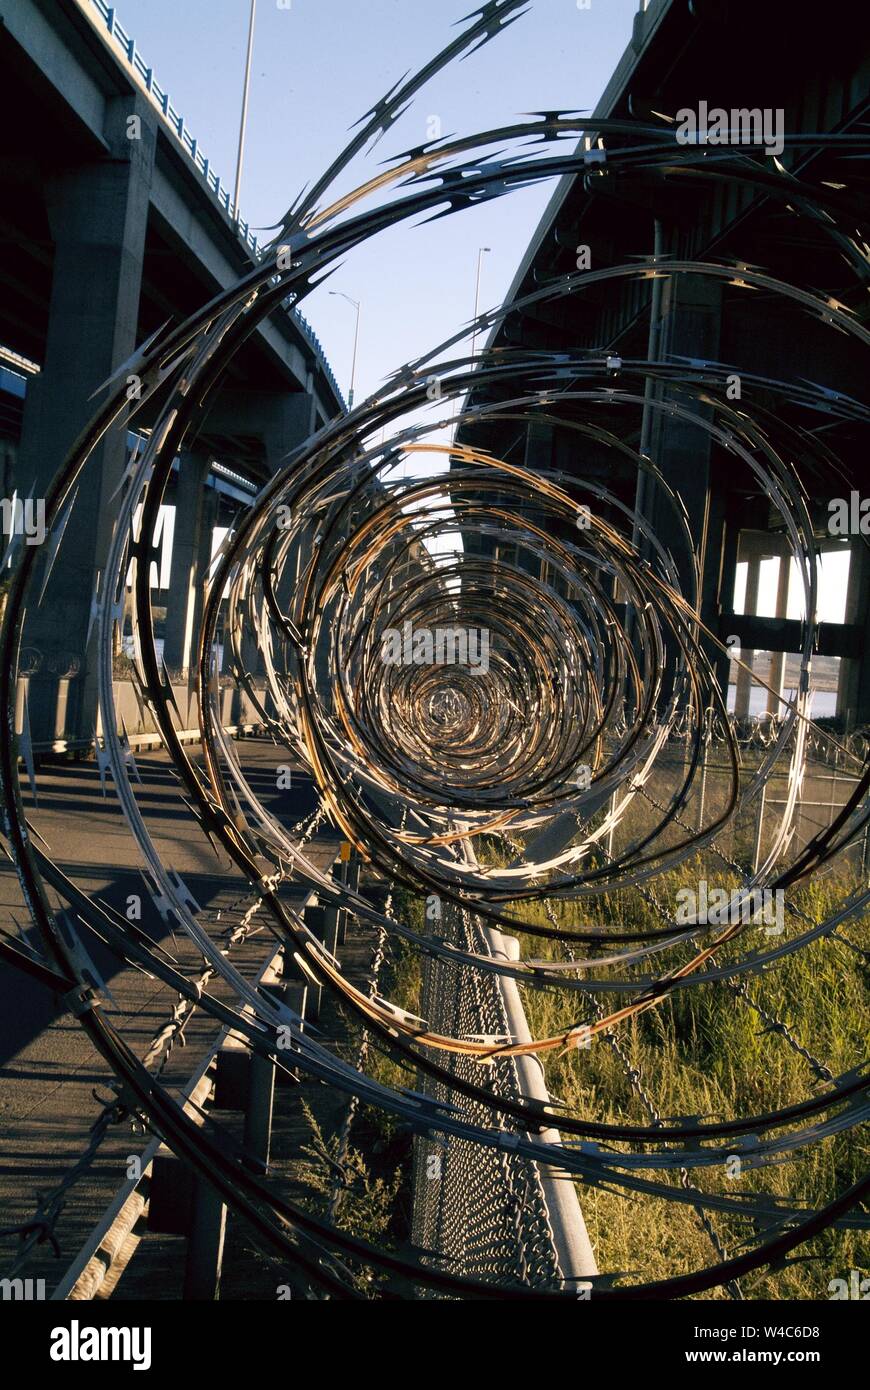 LOCK DOWN: Barb wire spirals along the top of a fence at an industrial complex beneath an elevated highway in Perth Amboy, New Jersey. Stock Photo